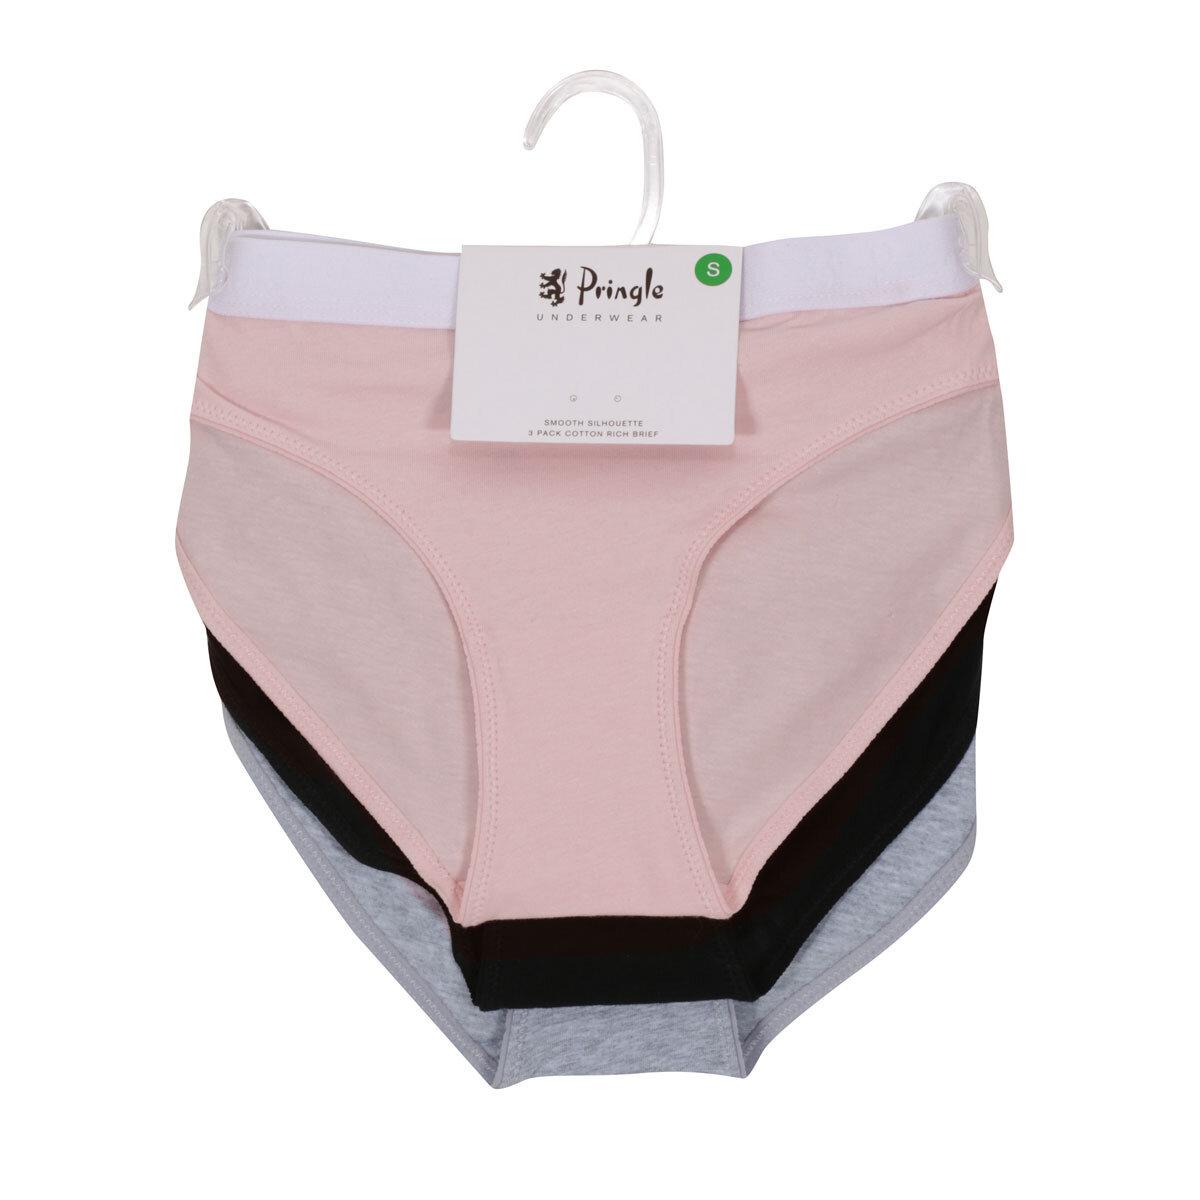 Pringle Ladies Brief, 2 x 3 Pack in 2 Colours and 3 Sizes